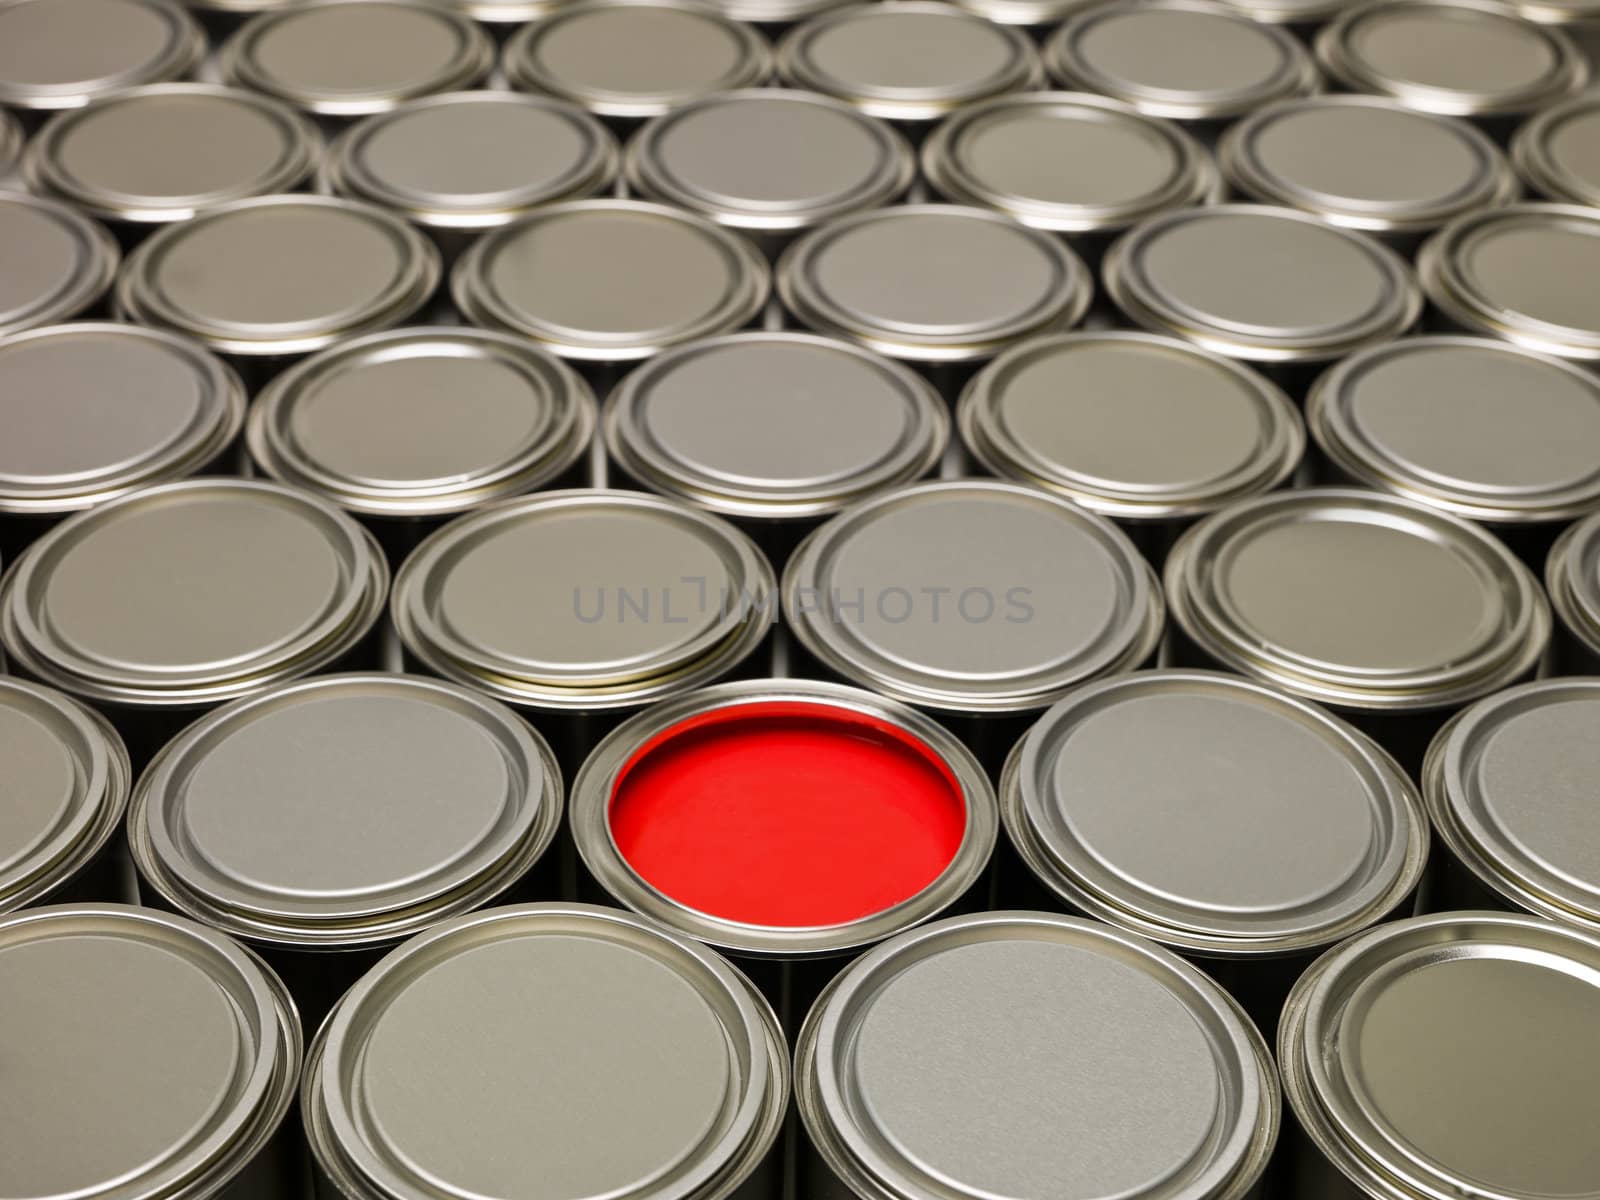 Full Frame of Paint Cans, one filled with red paint